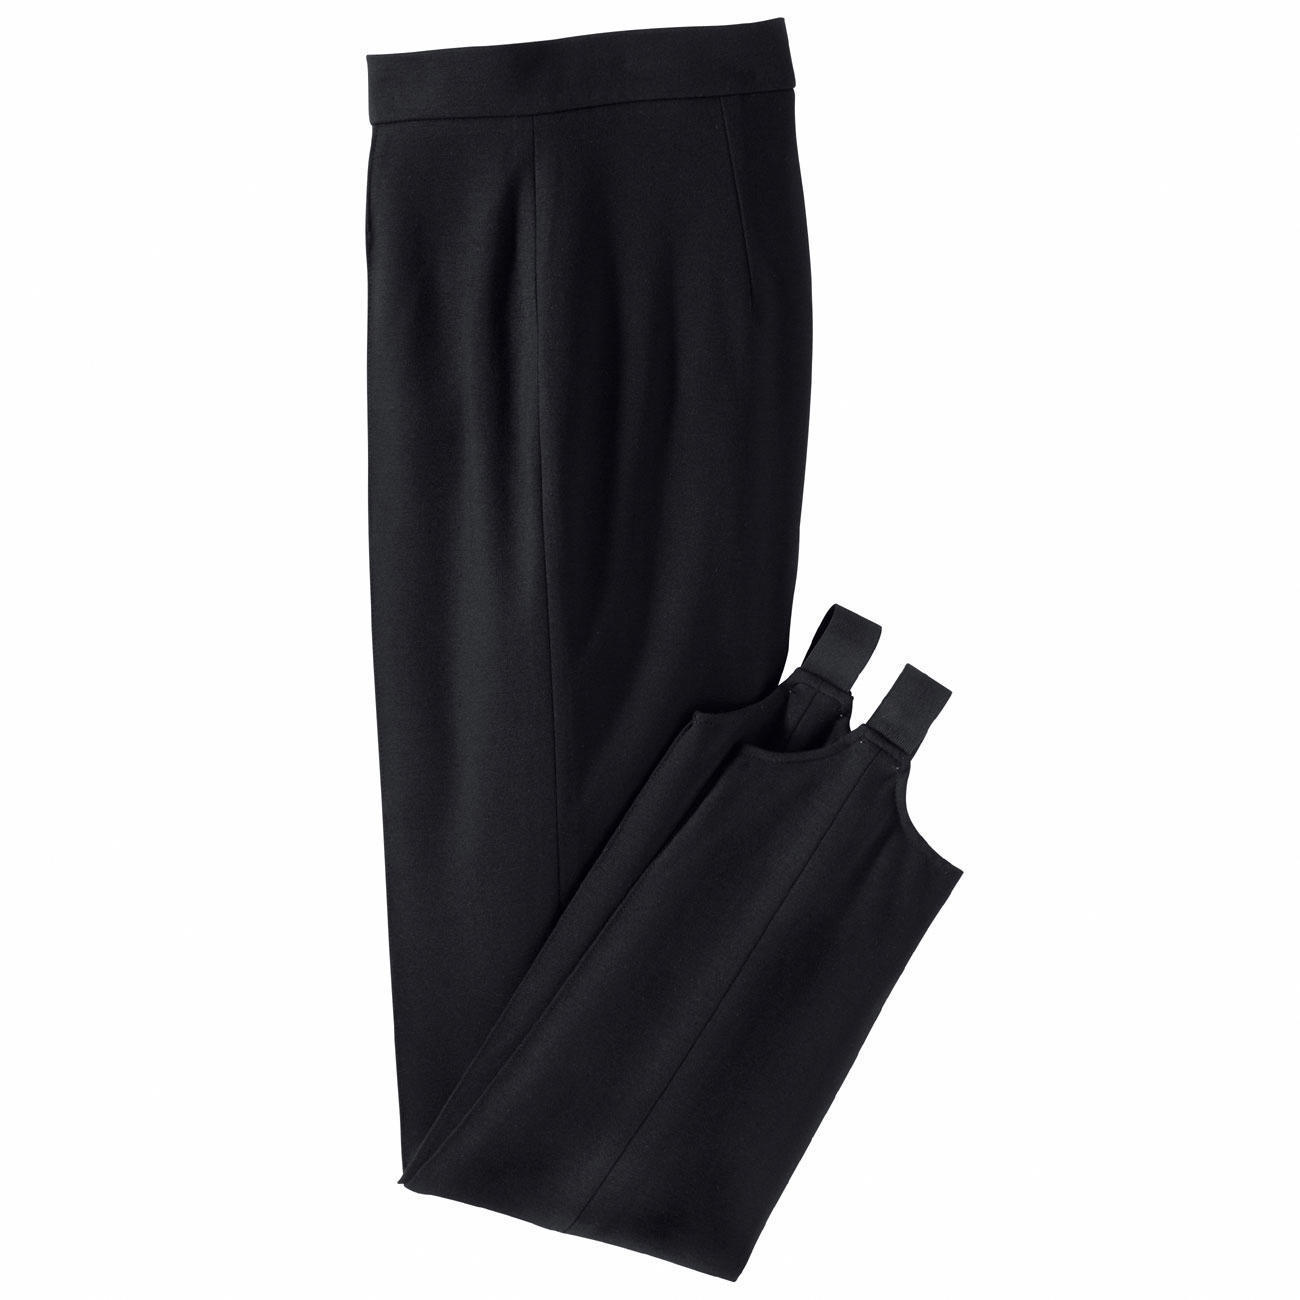 Stirrup Pants by Josiane Perron made in Canada